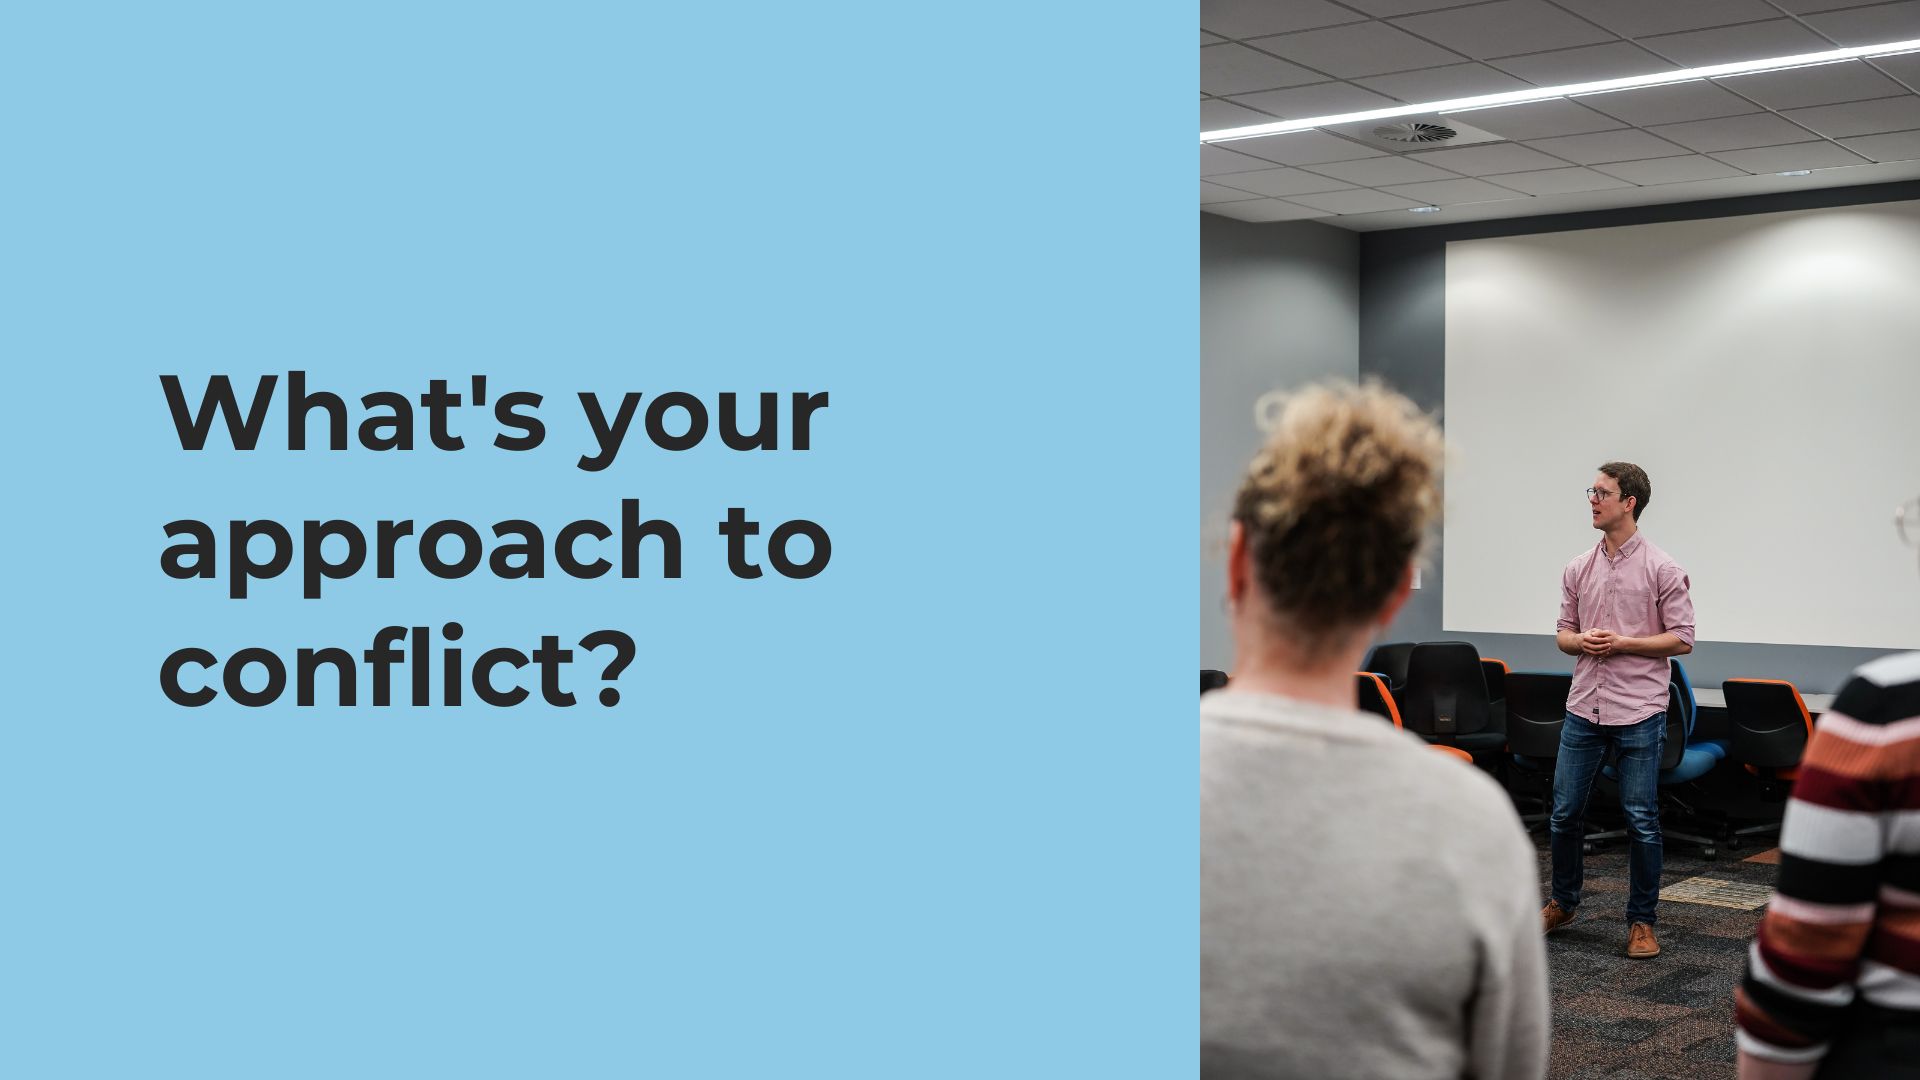 What's your approach to conflict?